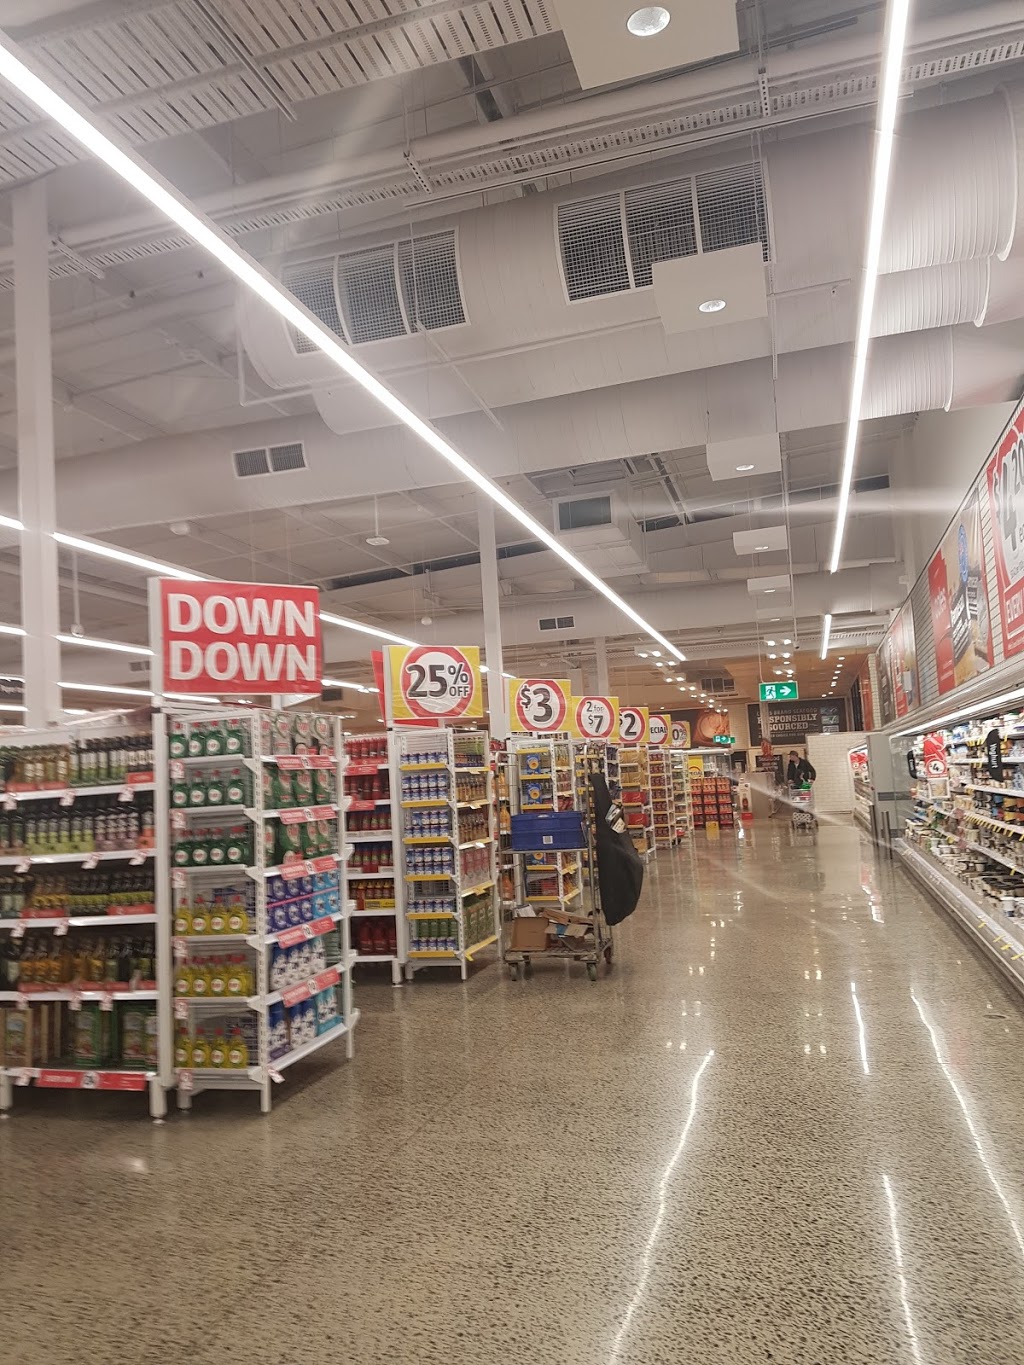 Coles Express Epping North | gas station | 1 Forum Way, Epping VIC 3076, Australia | 0394081647 OR +61 3 9408 1647